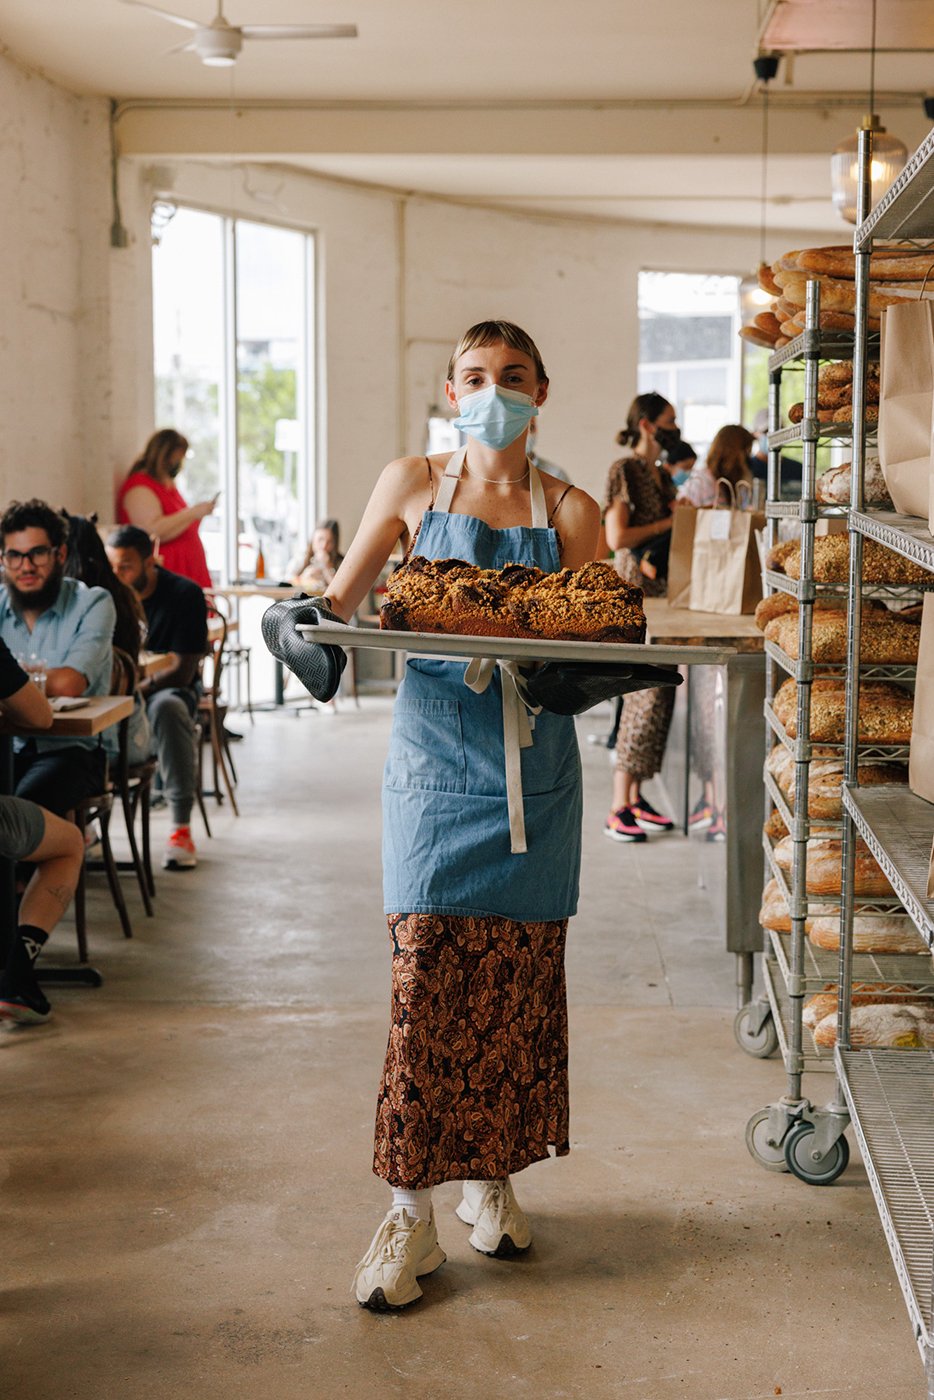 Woman working at Miami bakery shot by James Jackman for The New York Times